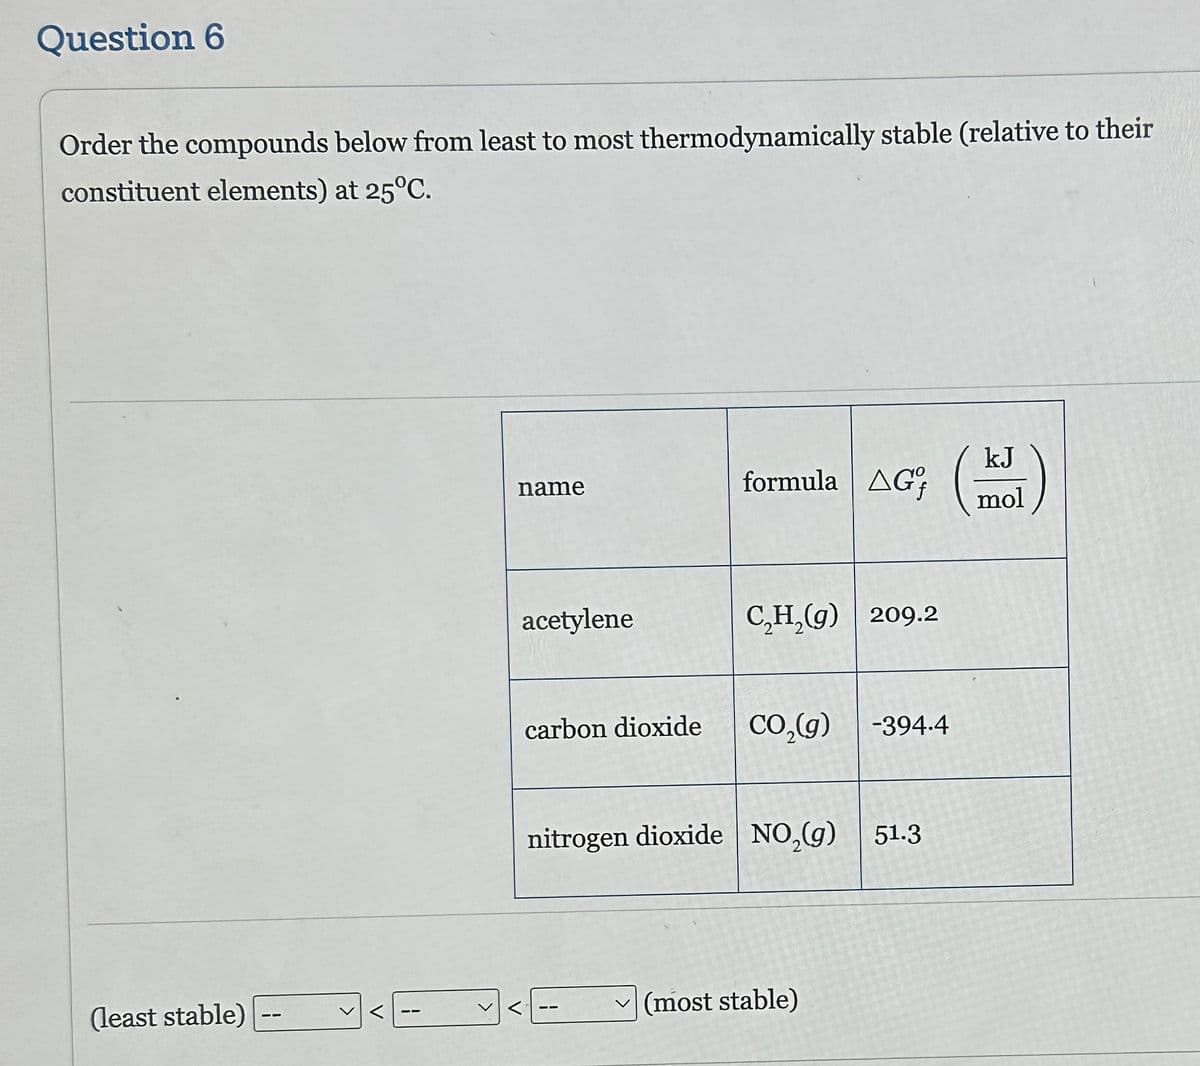 Question 6
Order the compounds below from least to most thermodynamically stable (relative to their
constituent elements) at 25°C.
(least stable)
name
V
acetylene
formula AG
C₂H₂(g) 209.2
carbon dioxide CO₂(g) -394.4
nitrogen dioxide NO₂(g) 51.3
(most stable)
kJ
mol